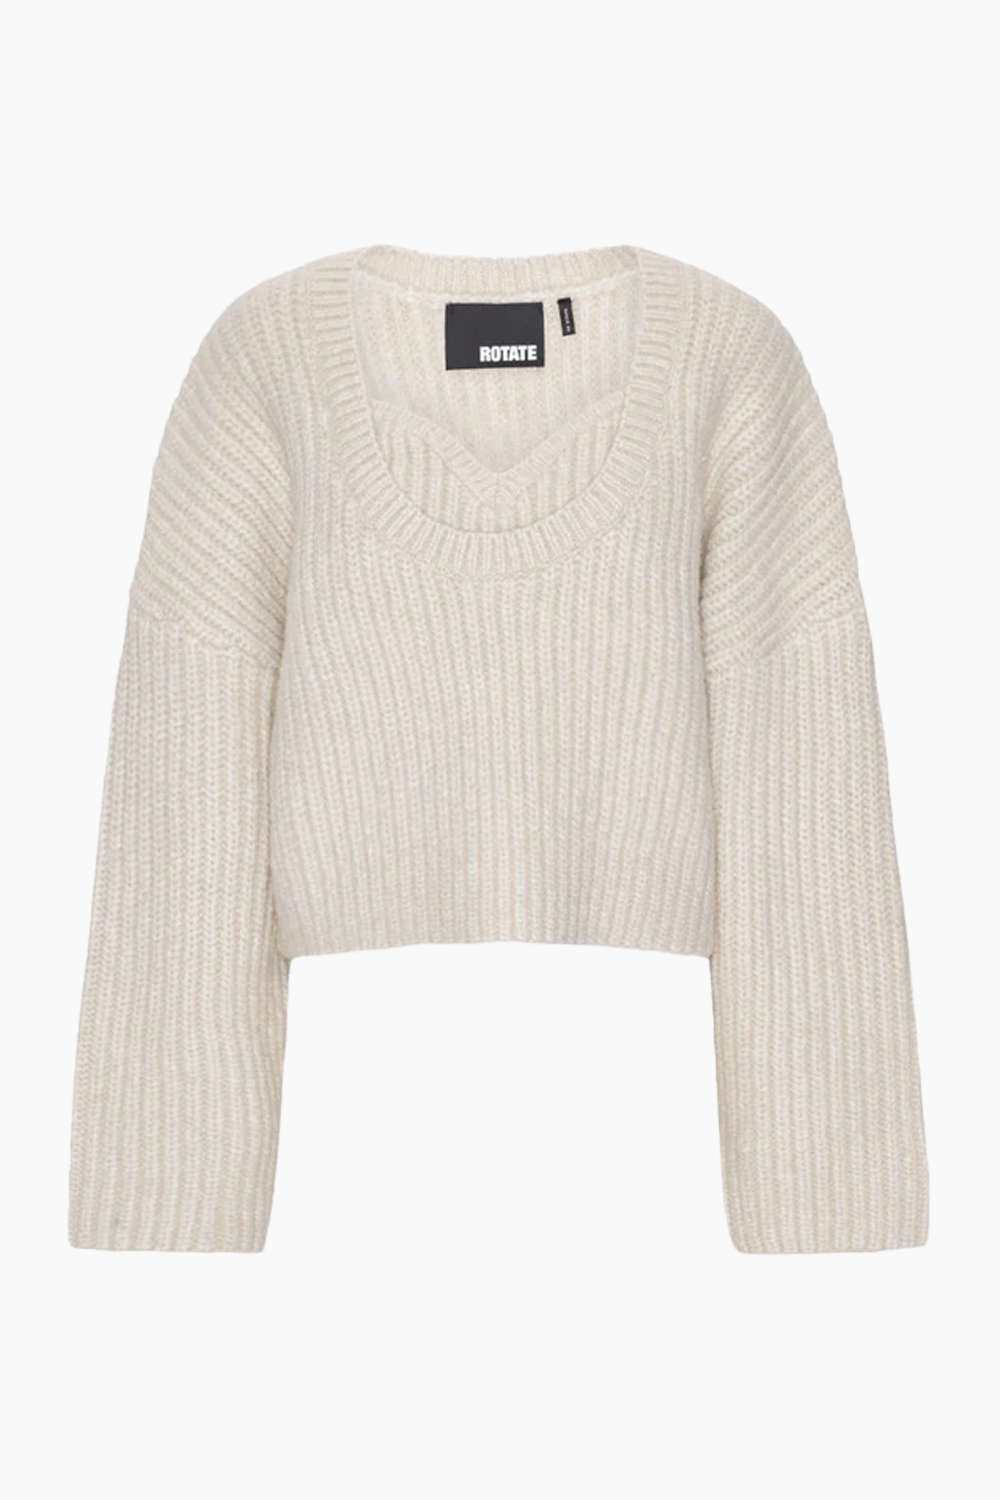 Cable Knit Crop Sweater - Pristine White - ROTATE